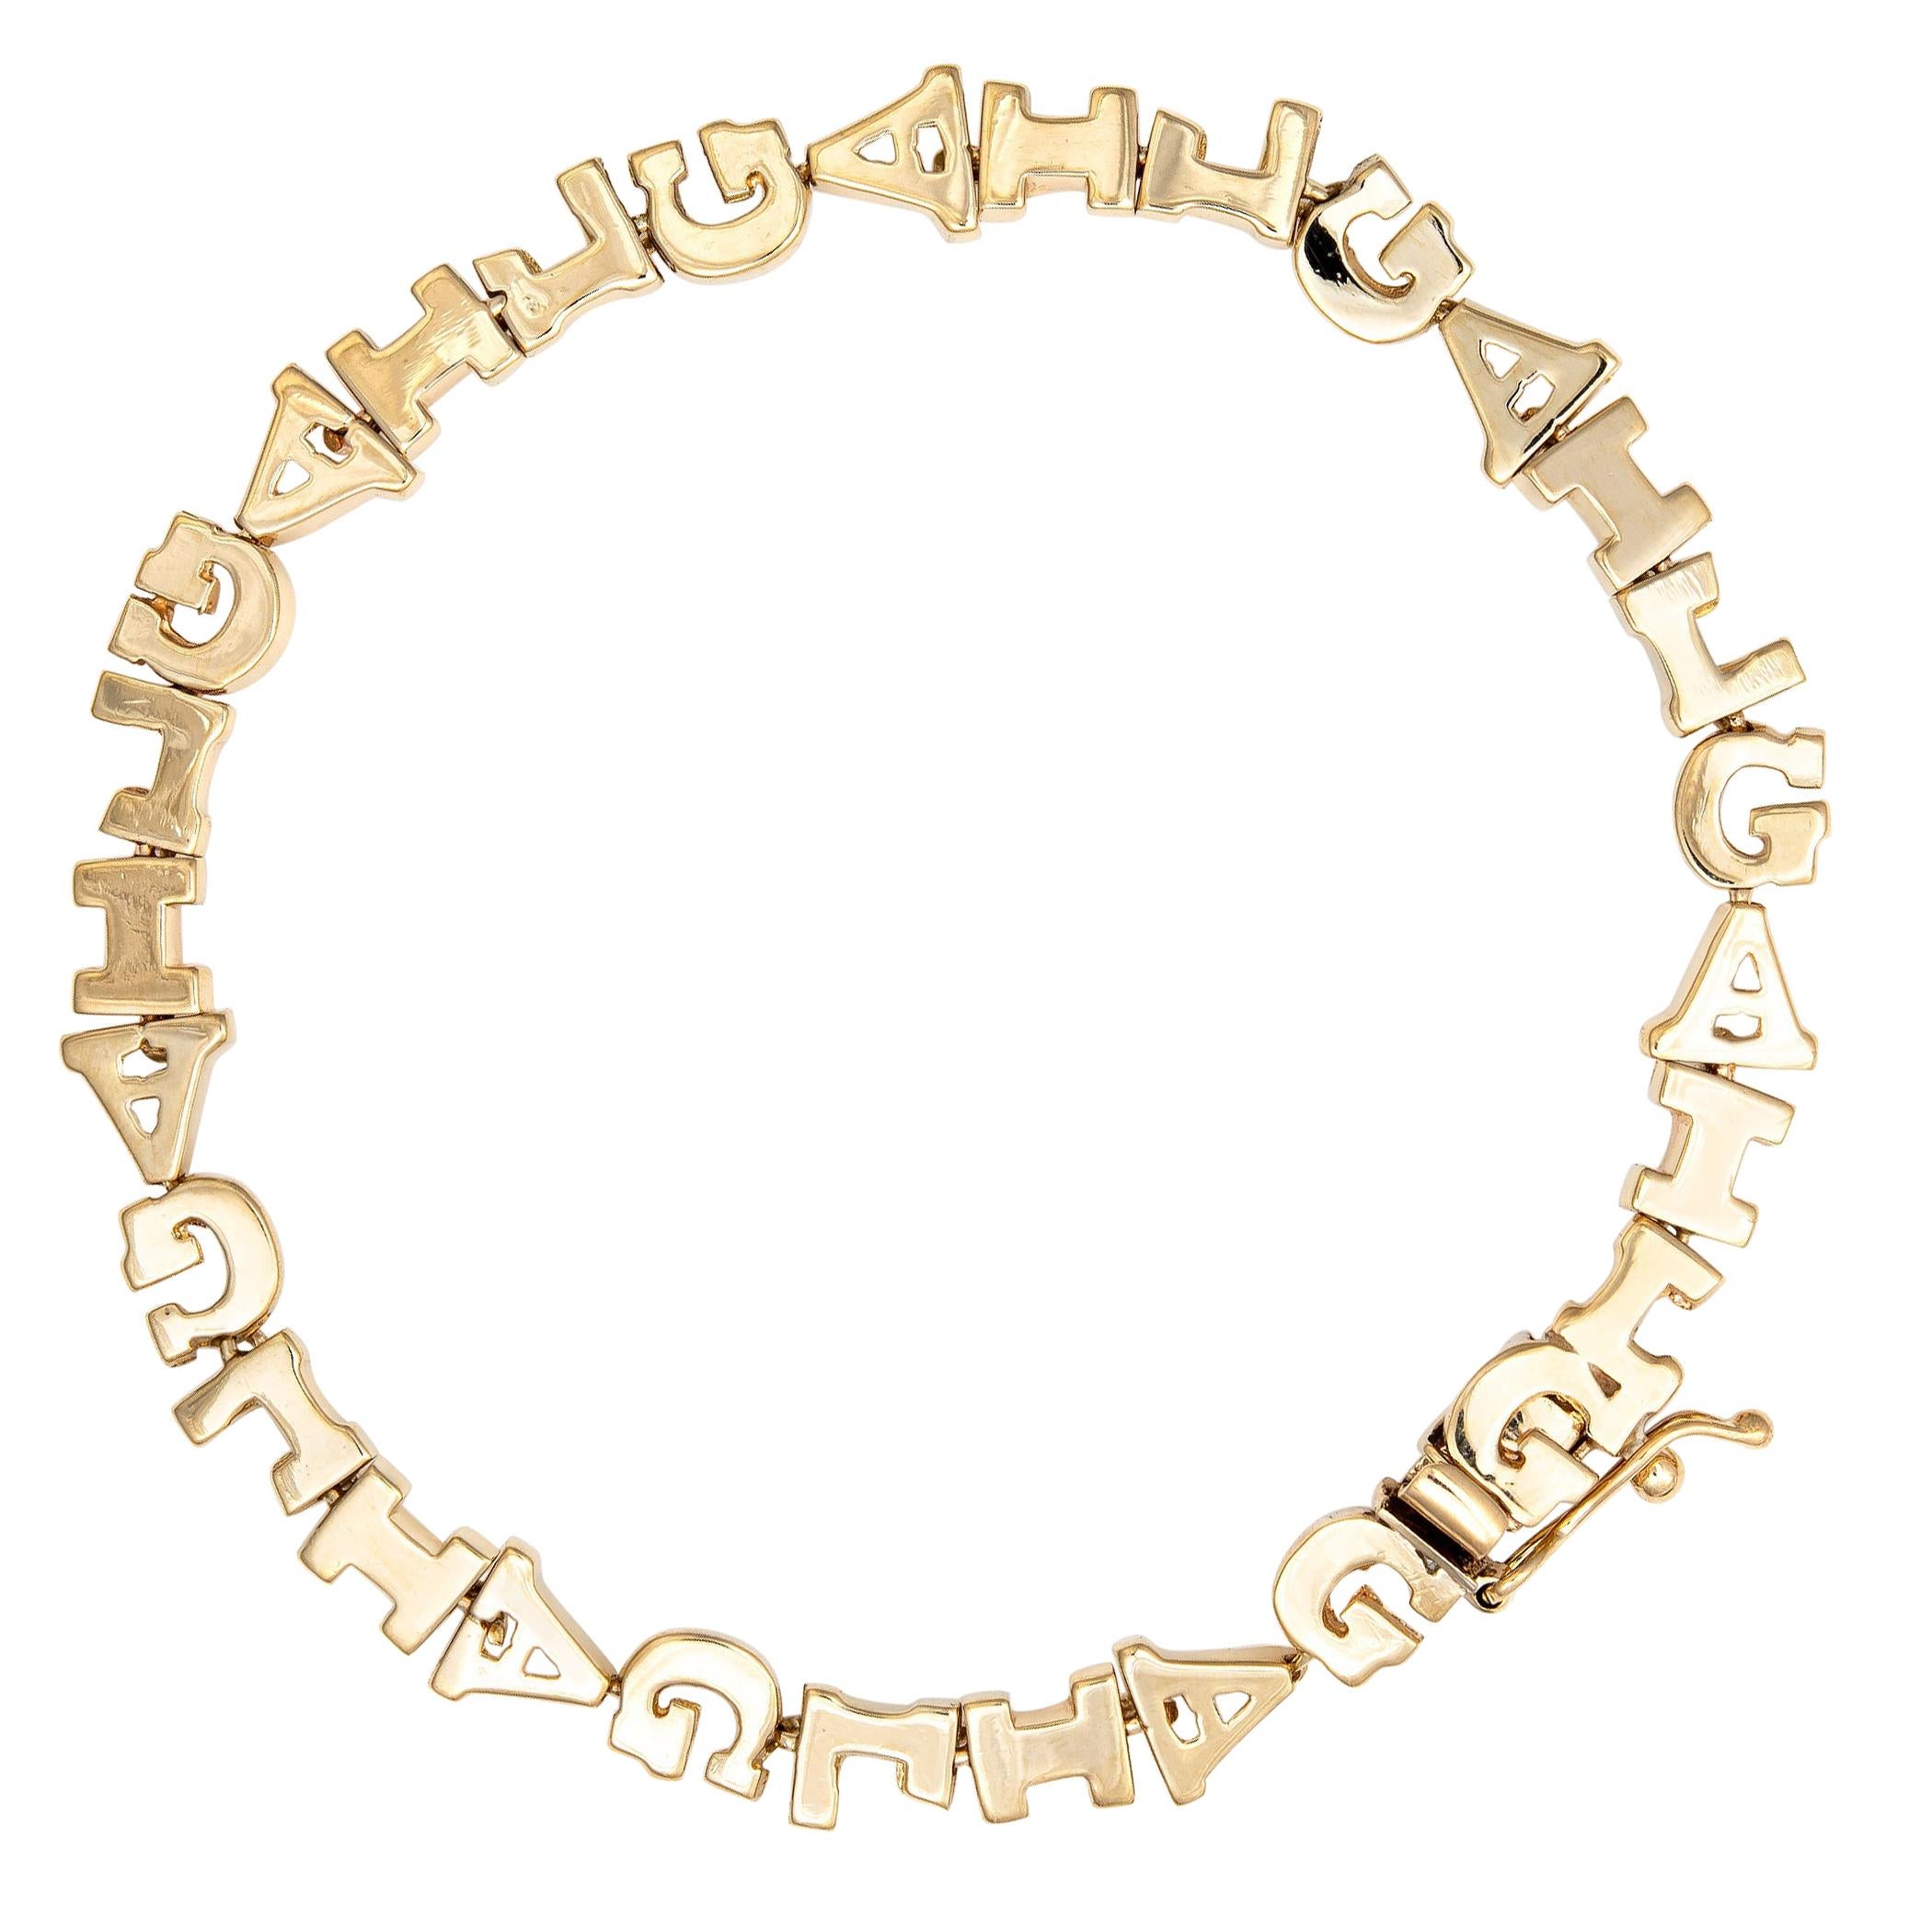 Gail Bracelet Vintage 14k Yellow Gold Letter Initial Nameplate Jewelry